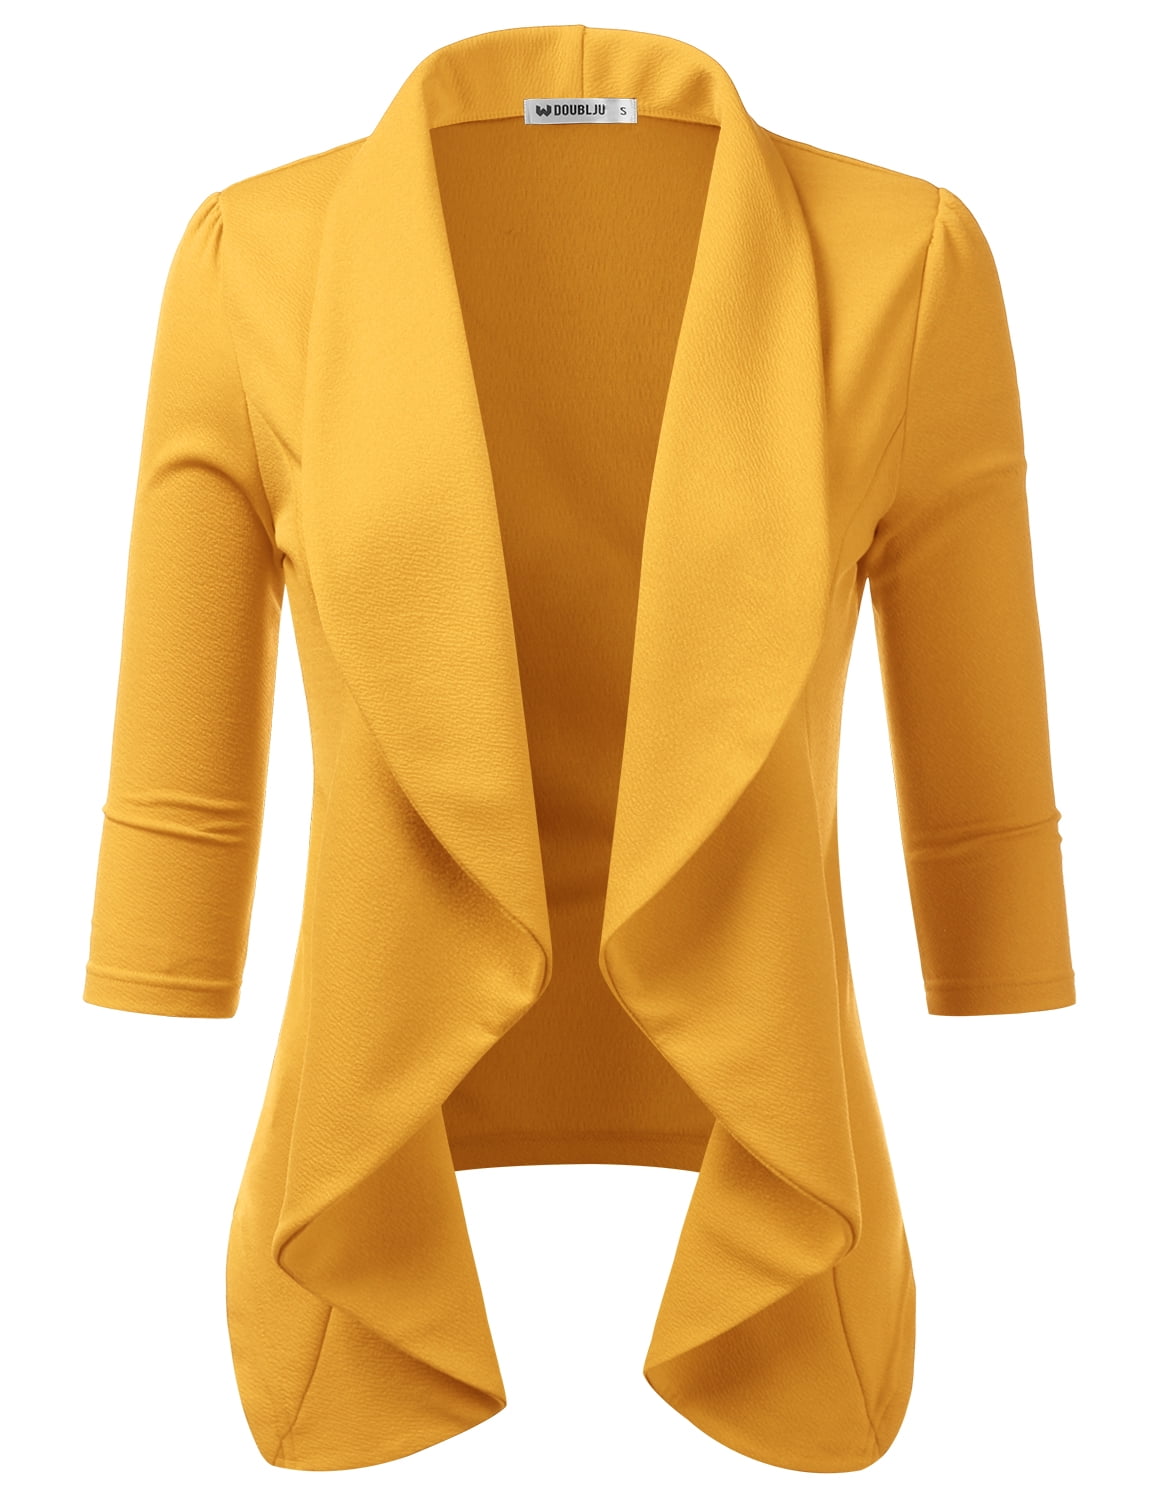 Women's Casual Work Open Front Jacket with Plus Size MUSTARD Plus Size - Walmart.com